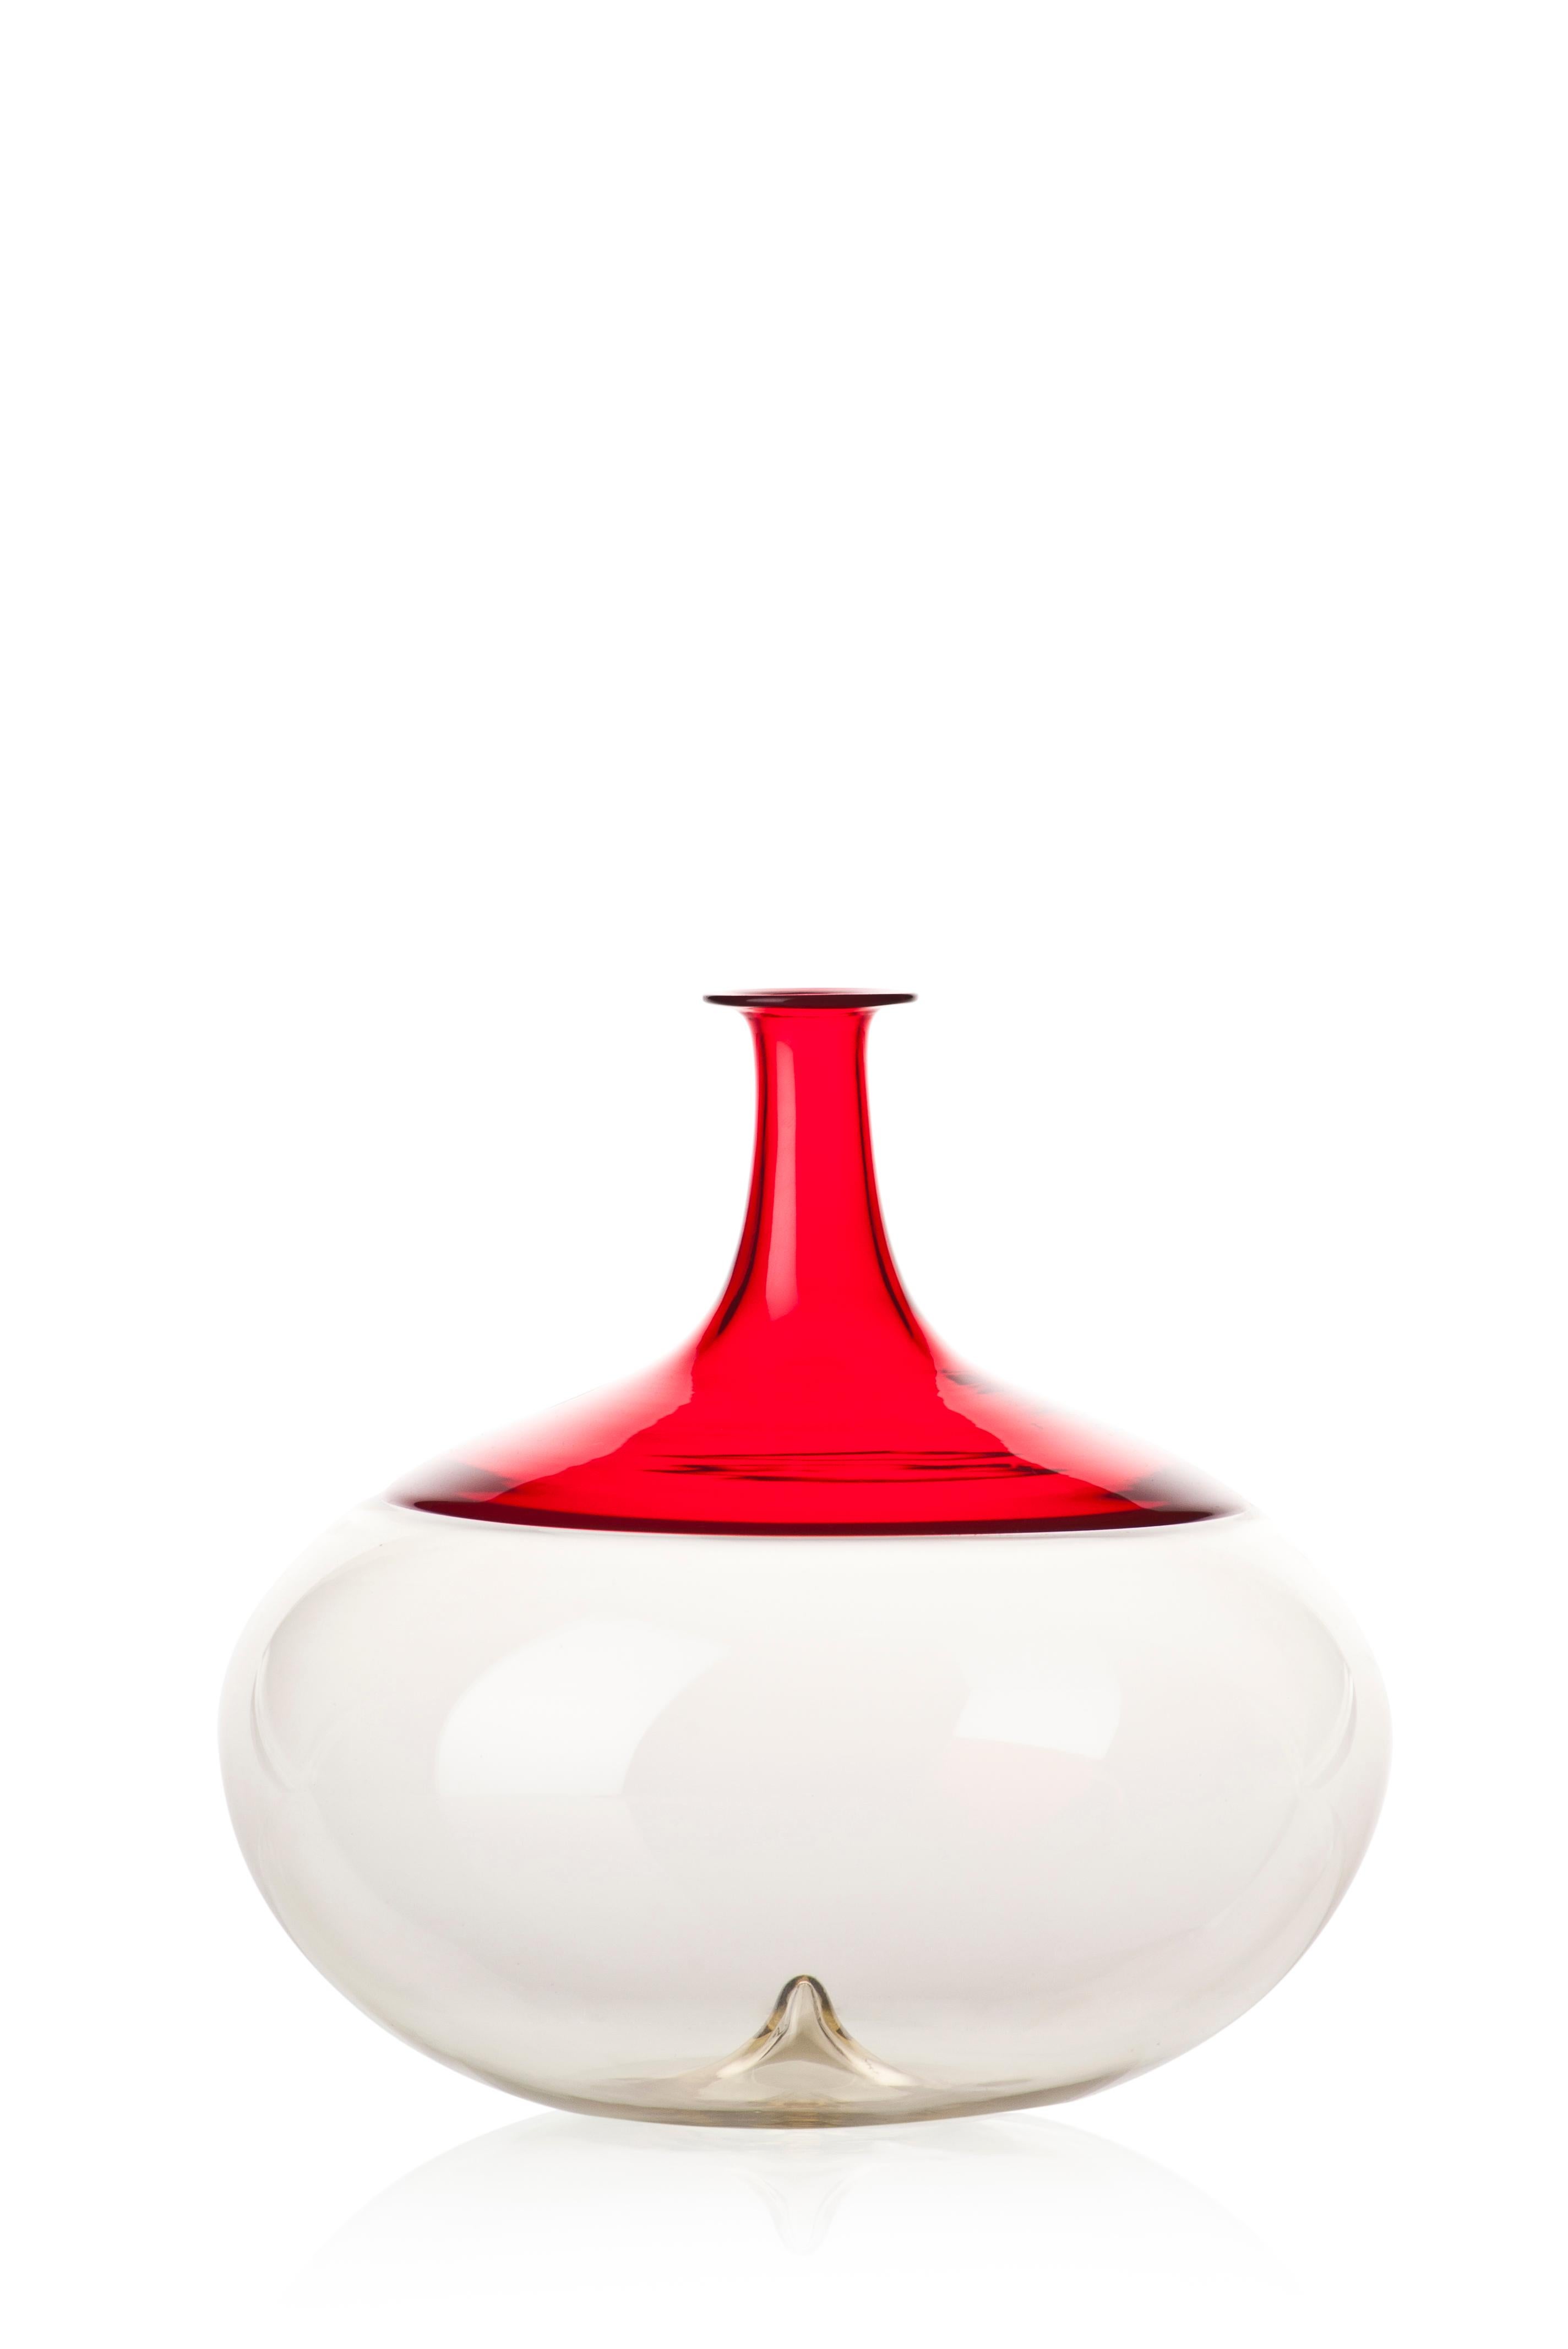 Venini glass vase in white and red designed by Tapio Wirkkala in 1966. Perfect for indoor home decor as container or statement piece for any room.

Dimensions: 19 cm diameter x 19 cm height.